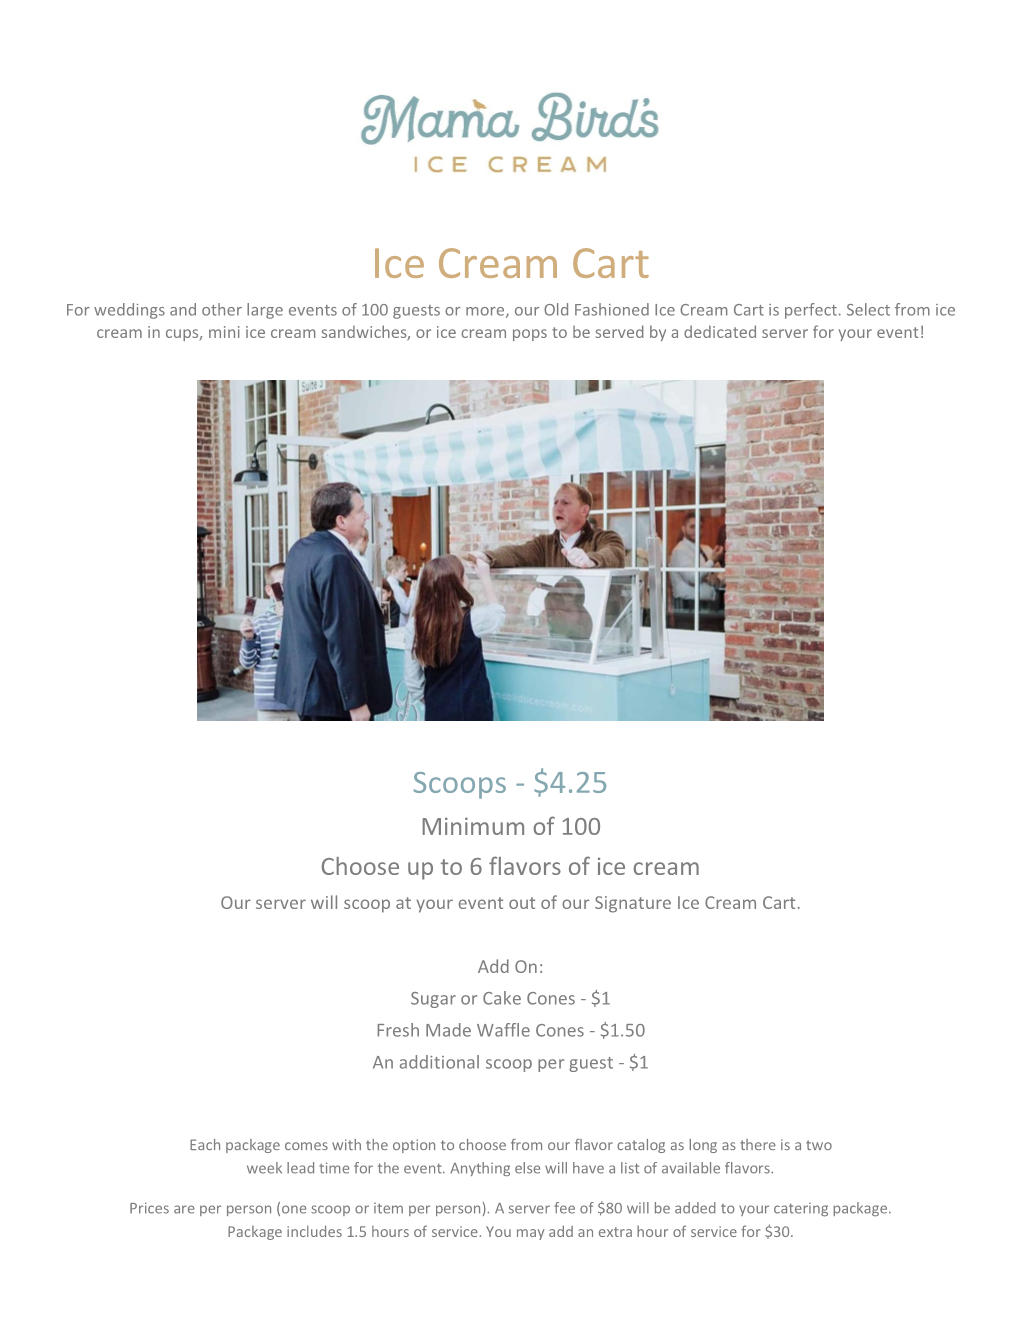 Ice Cream Cart for Weddings and Other Large Events of 100 Guests Or More, Our Old Fashioned Ice Cream Cart Is Perfect